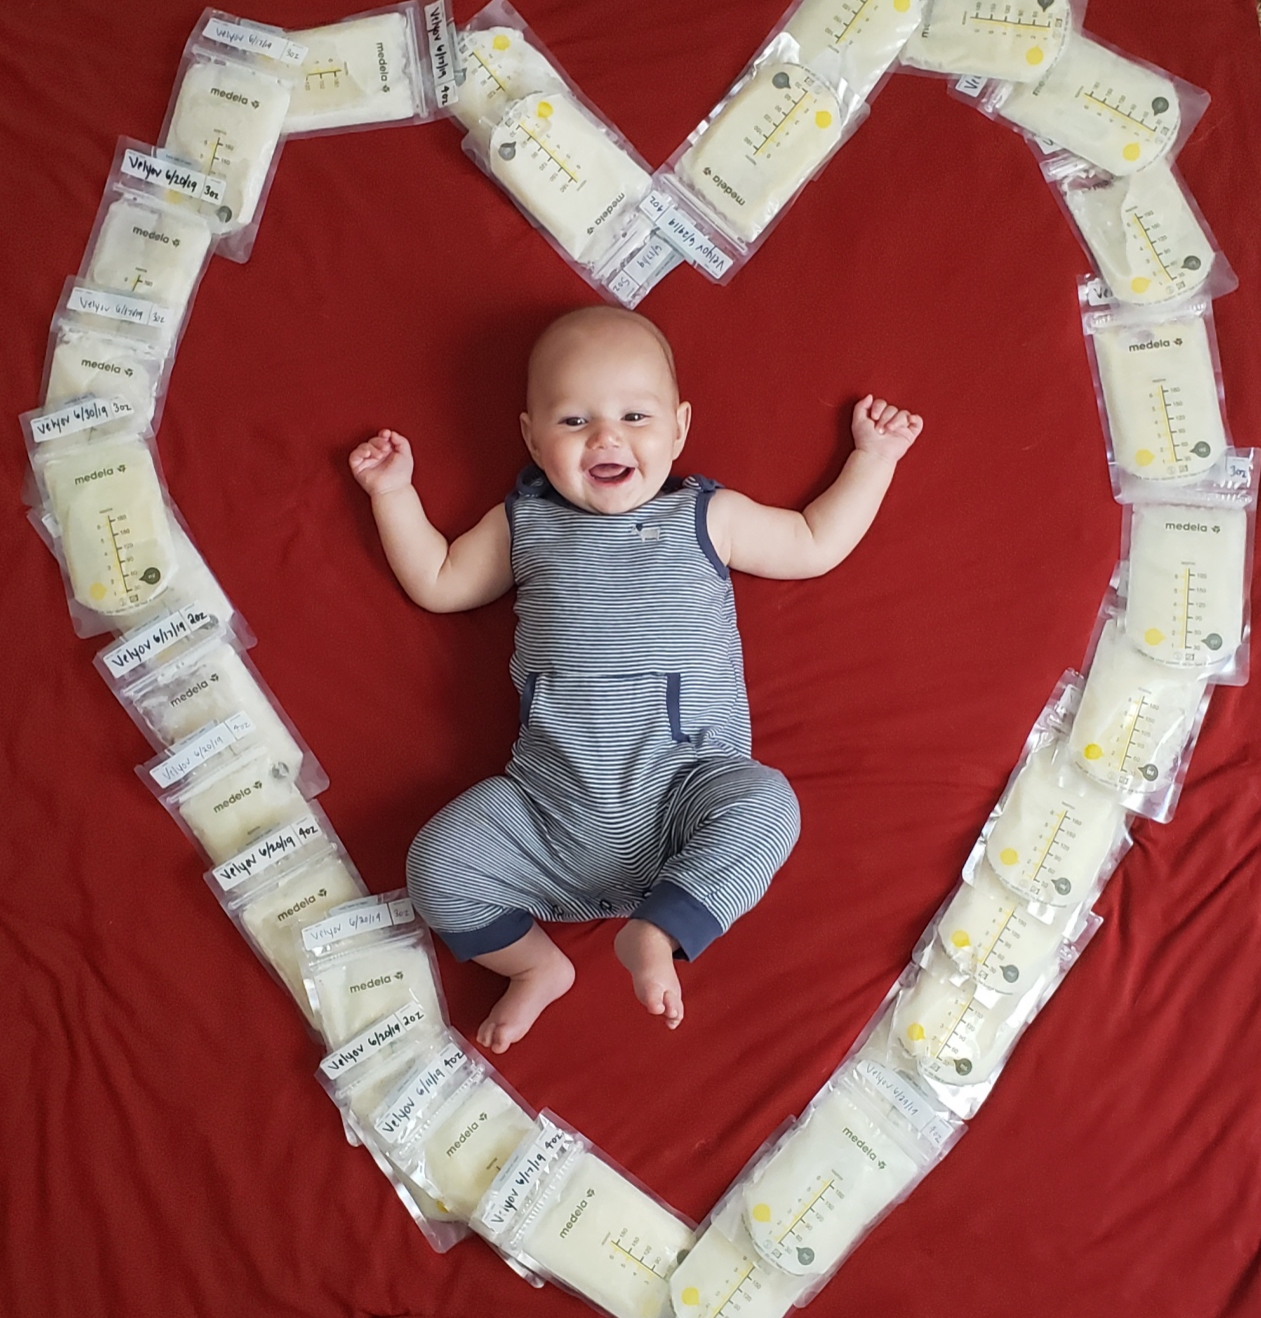 Happy baby surrounded by donated breast milk